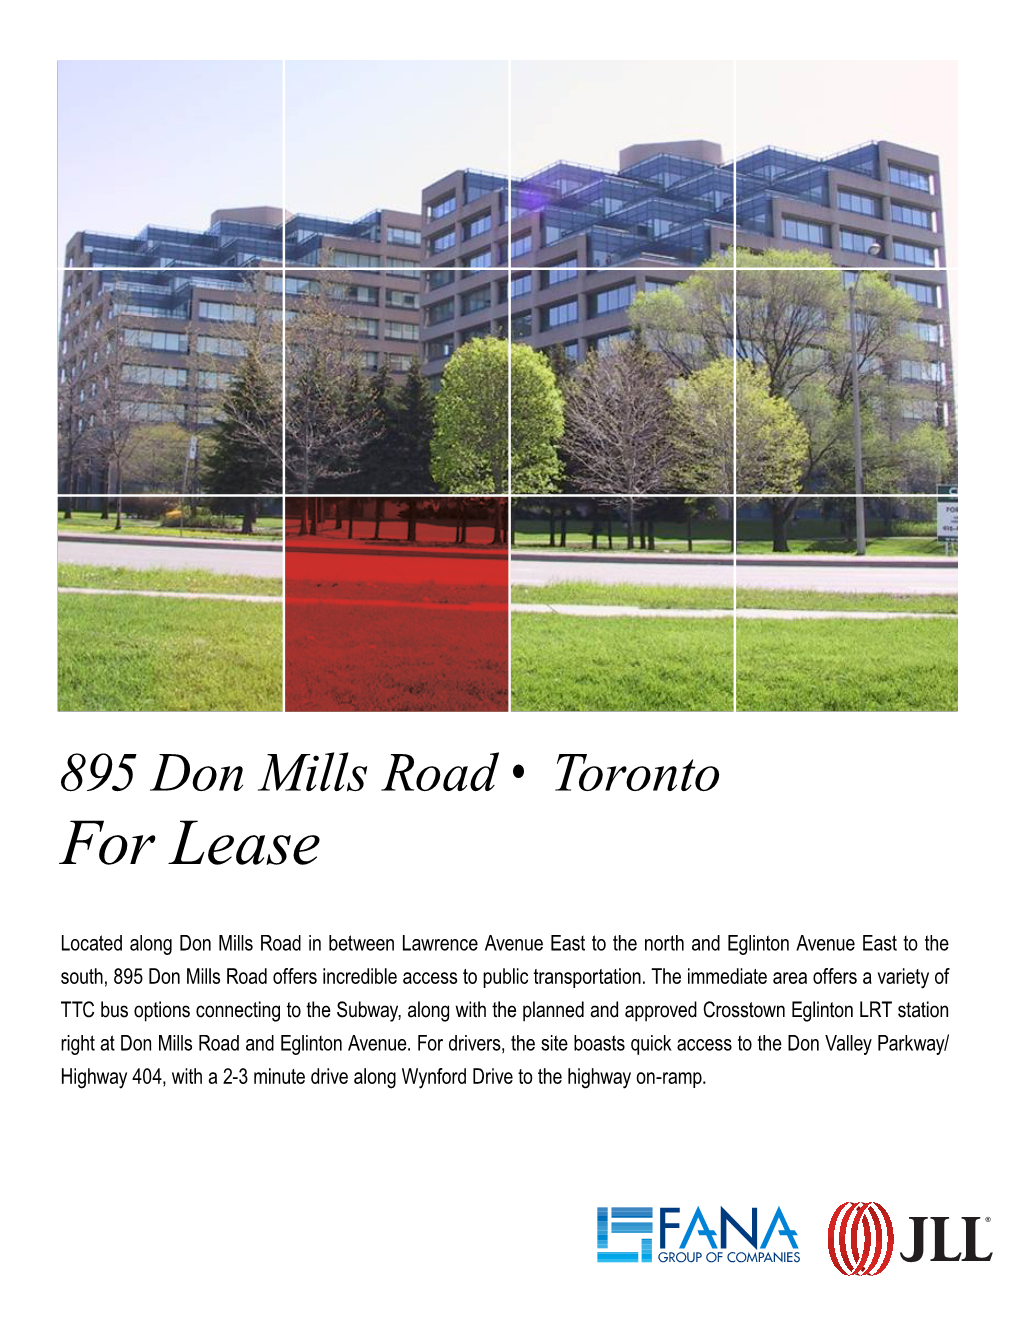 895 Don Mills Road • Toronto for Lease